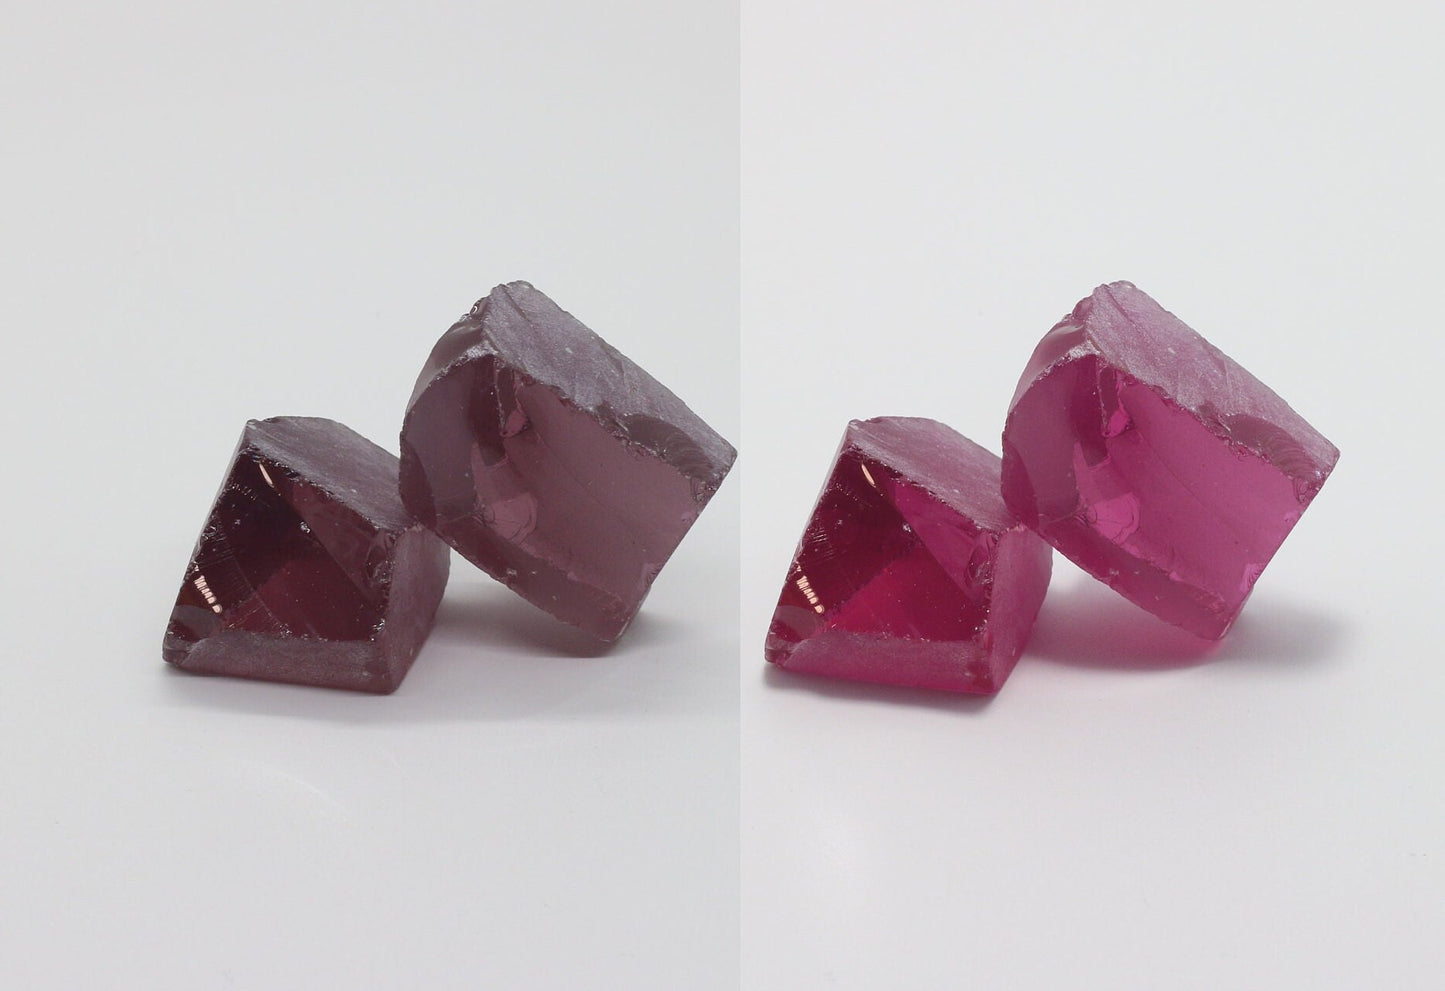 Color Changing Nanosital Synthetic Lab Created Faceting Rough for Gem Cutting - #69 - Various Sizes